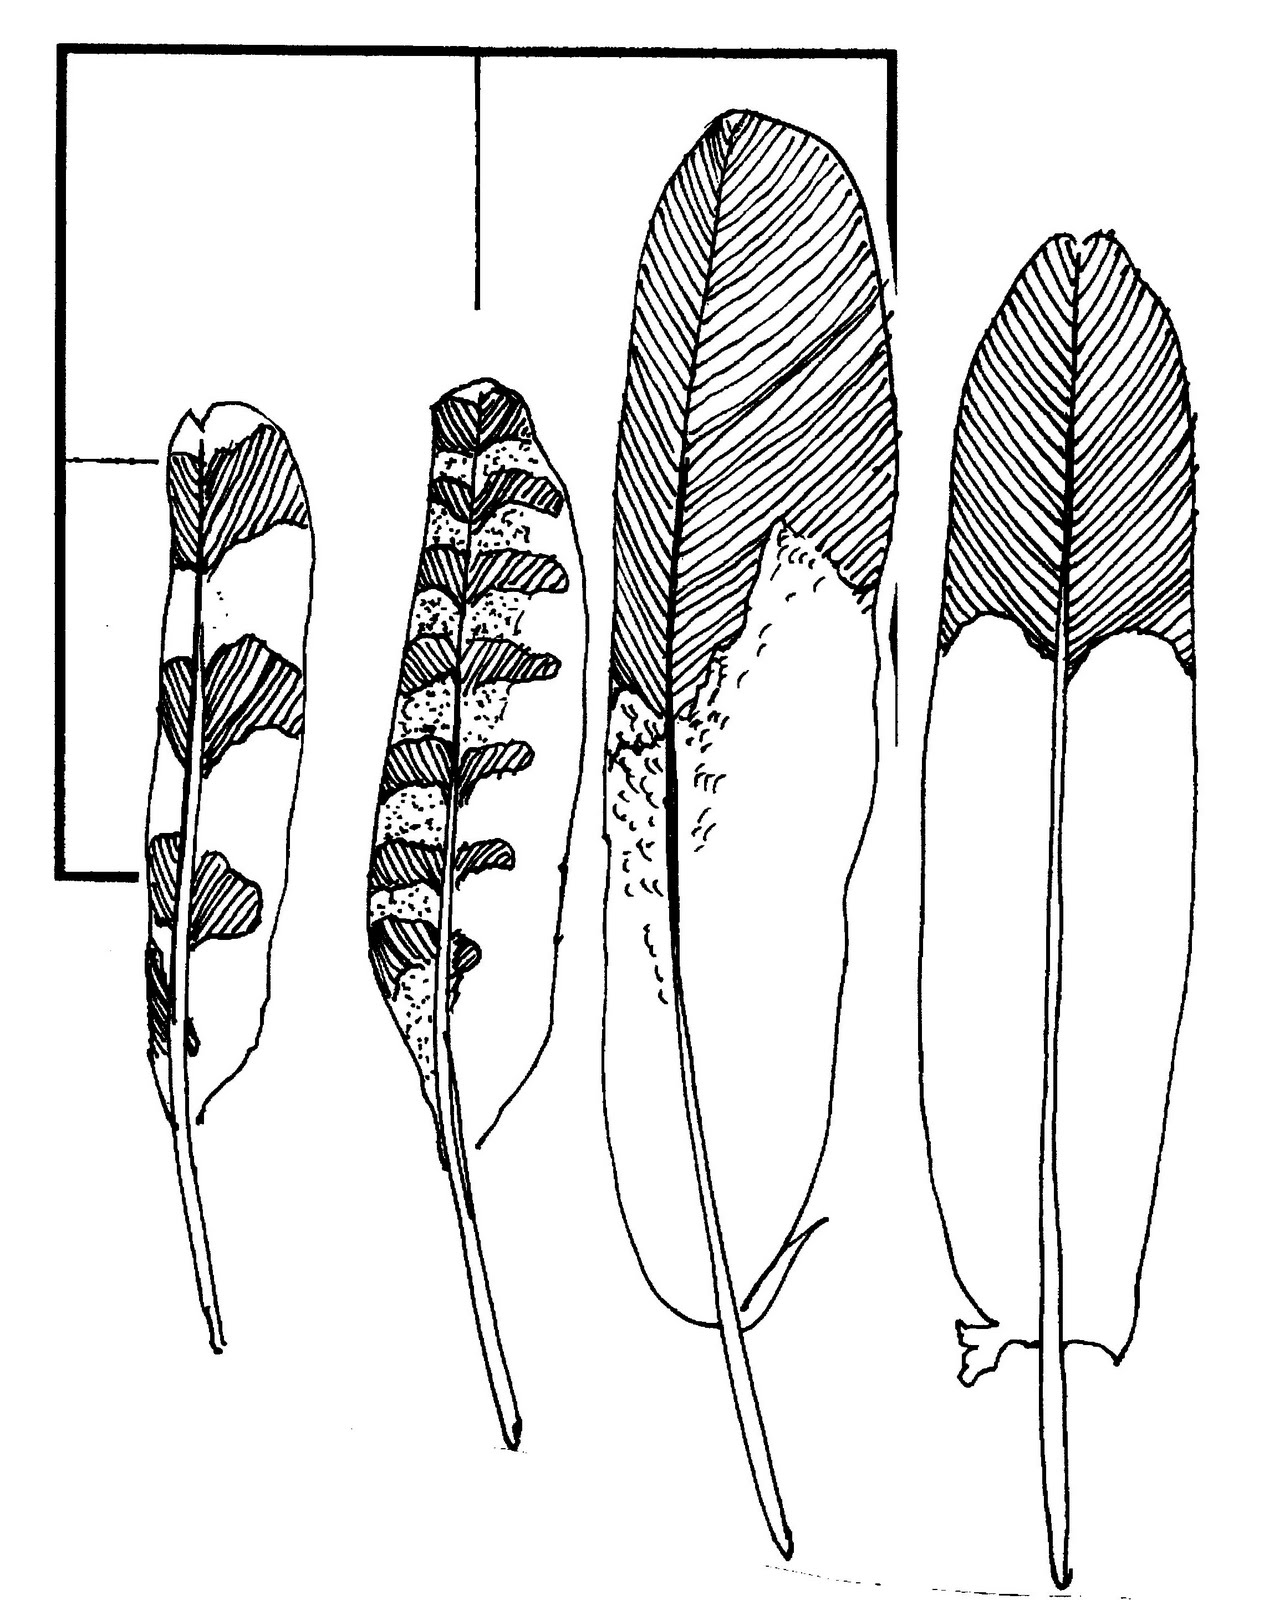 Eagle Feathers Drawings To Feathers For My